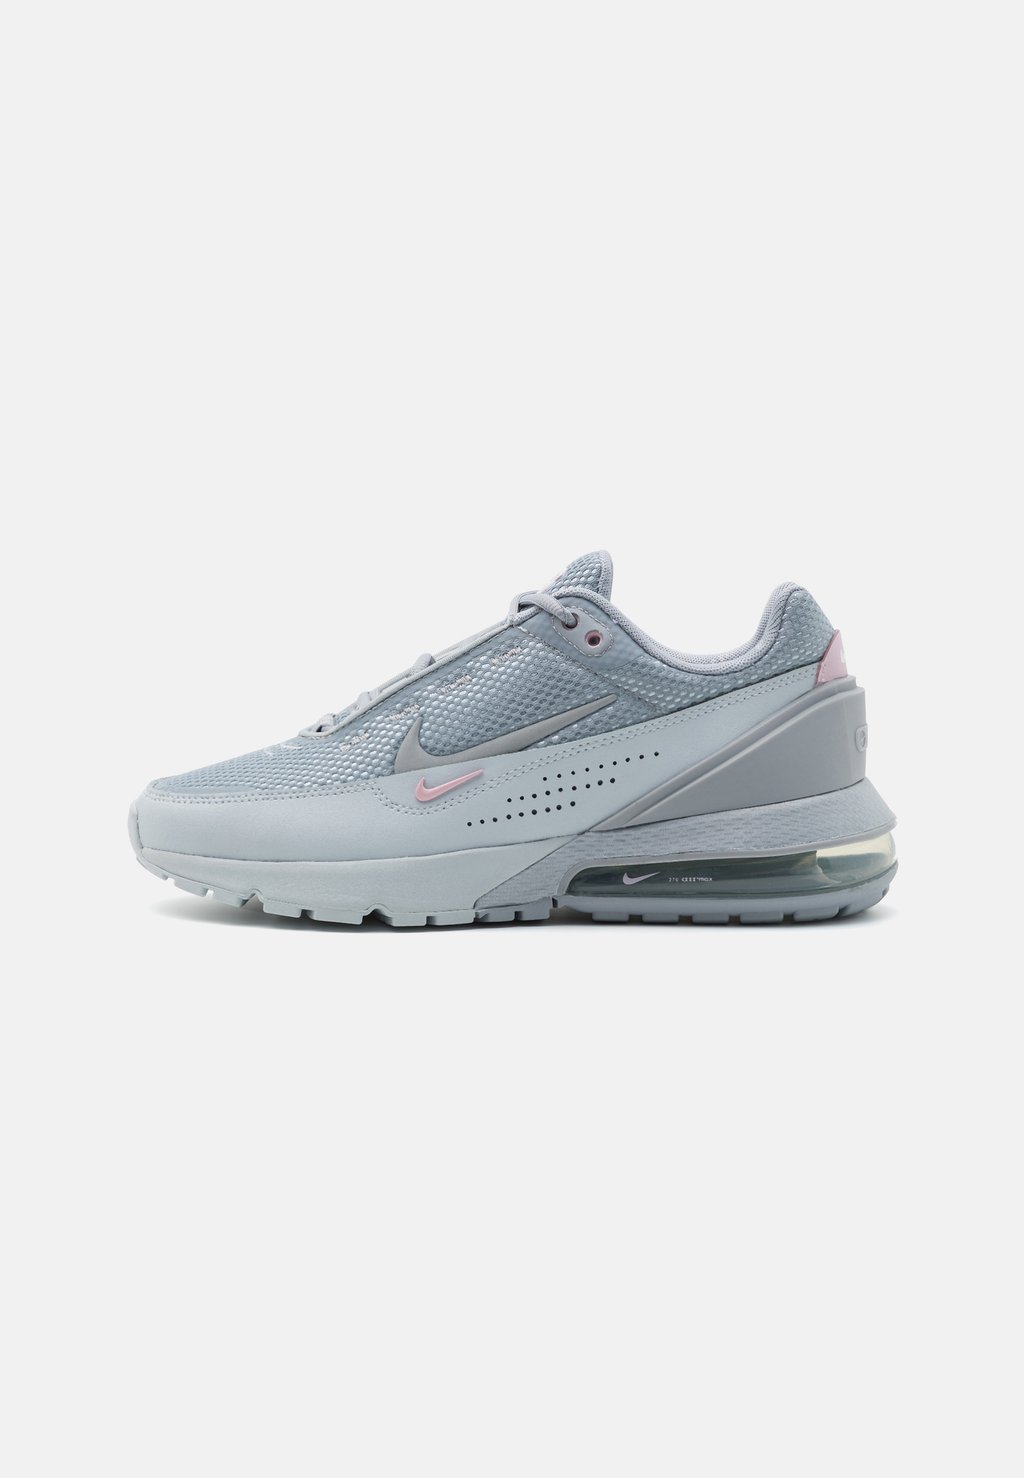 Низкие кроссовки Air Max Pulse Nike, цвет wolf grey/pink foam/pure platinum/white/metallic silver/reflect silver 999 silver pot pure silver water pot pure handmade a japanese tea ceremony household tea set pure silver water boiling teapot